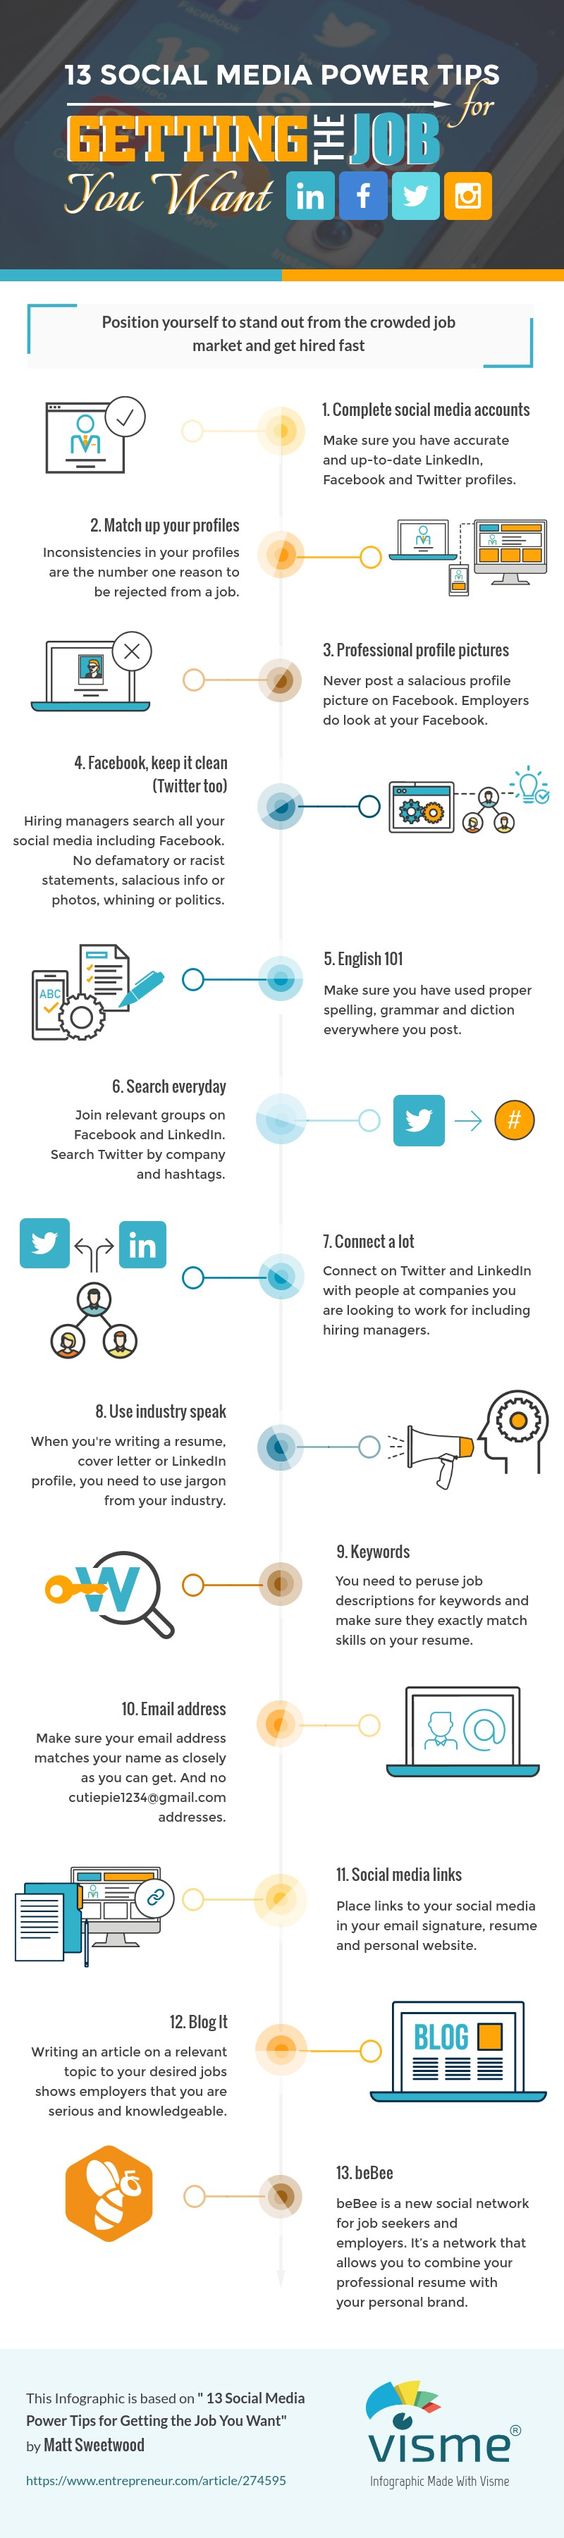 [Infographic] 13 Social Media Power Tips for Getting the Job You Want